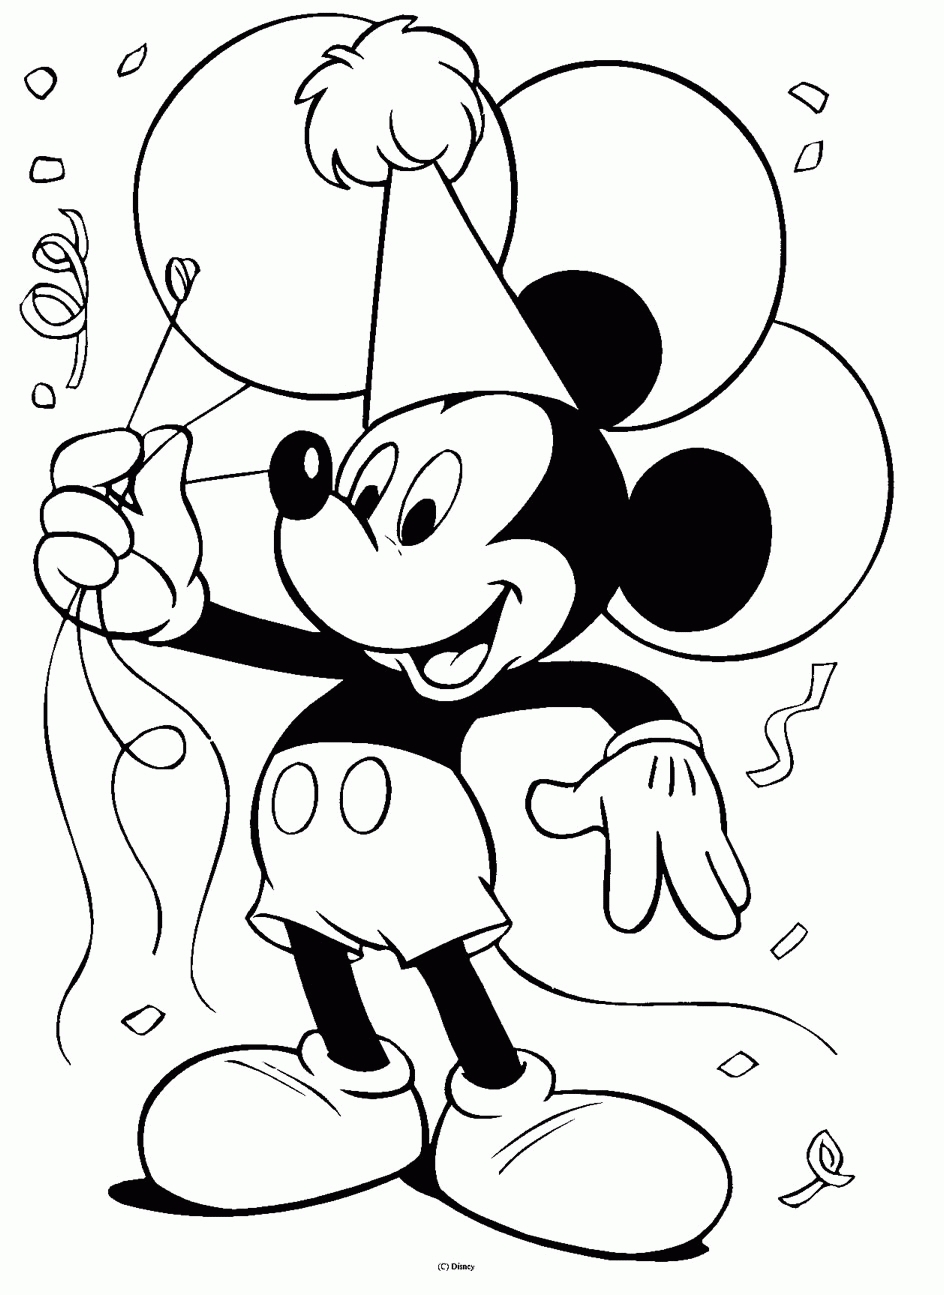 mickey mouse coloring pages printable